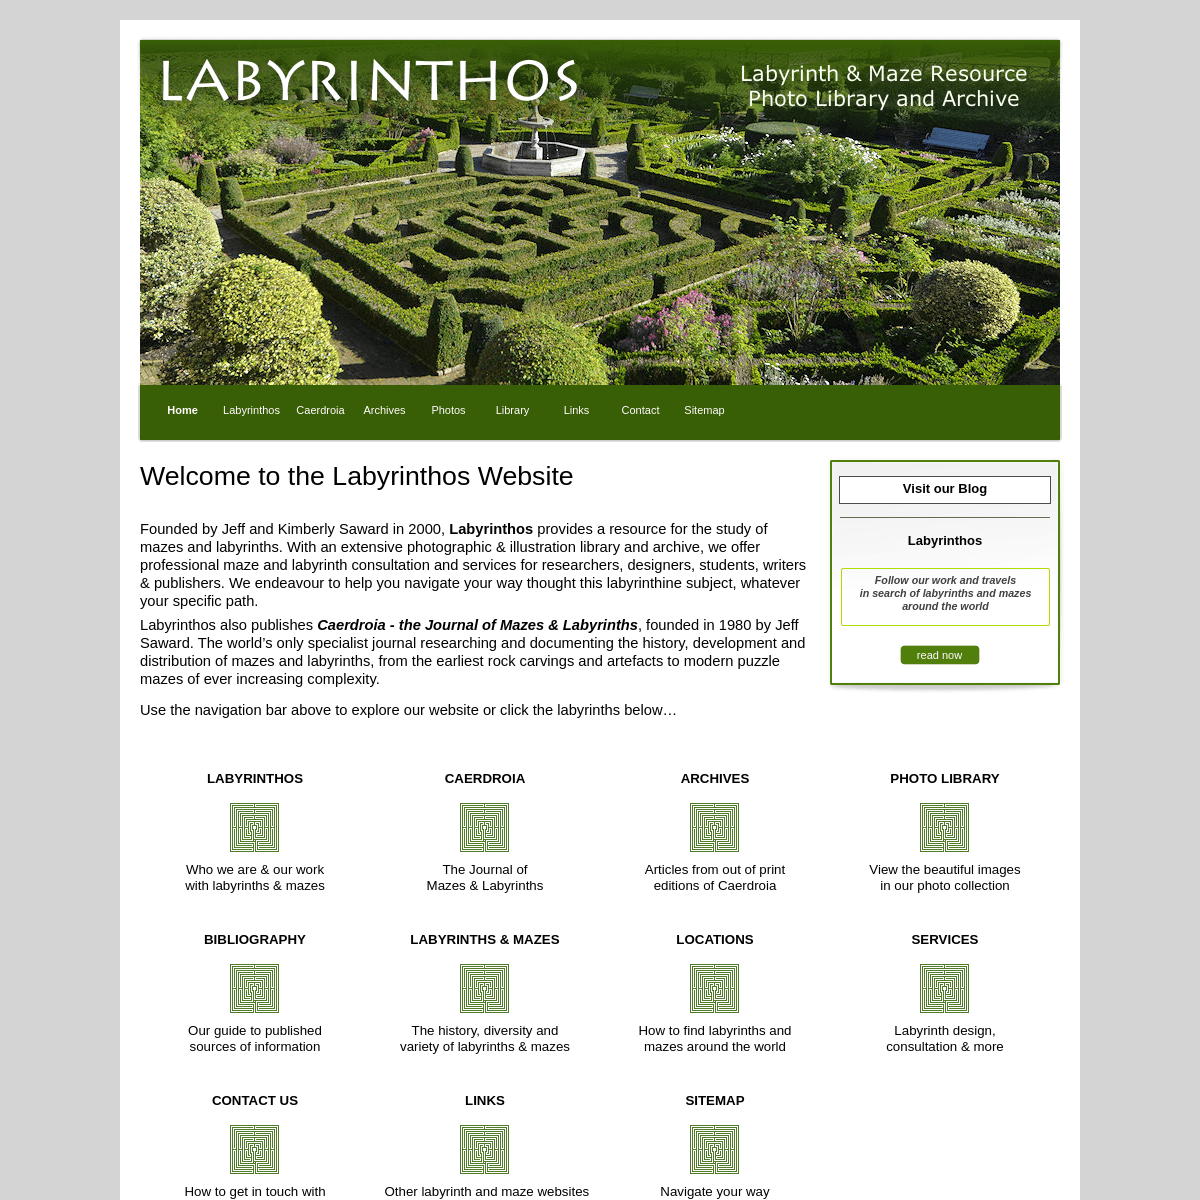 A complete backup of https://labyrinthos.net